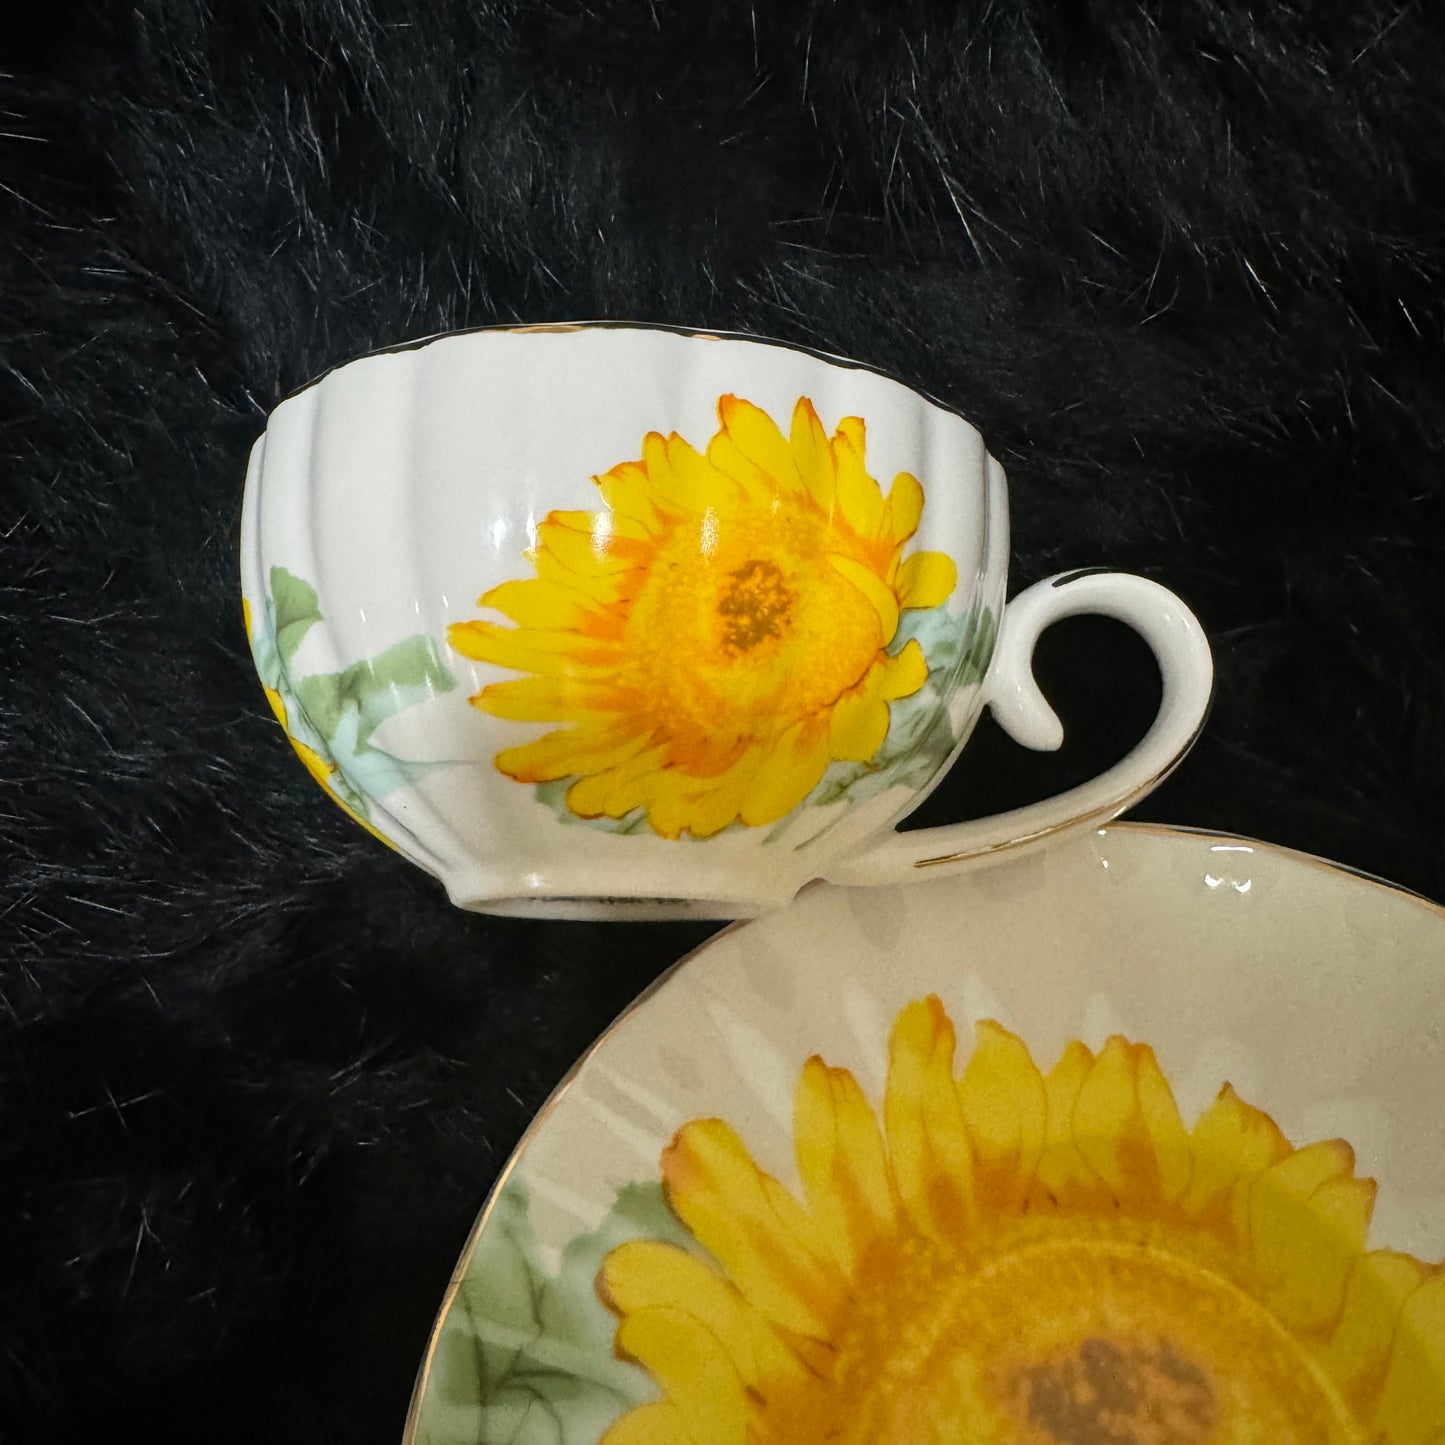 Sunflower Tea cup and saucer set. FREE course to learn to read this teacup the easy way.